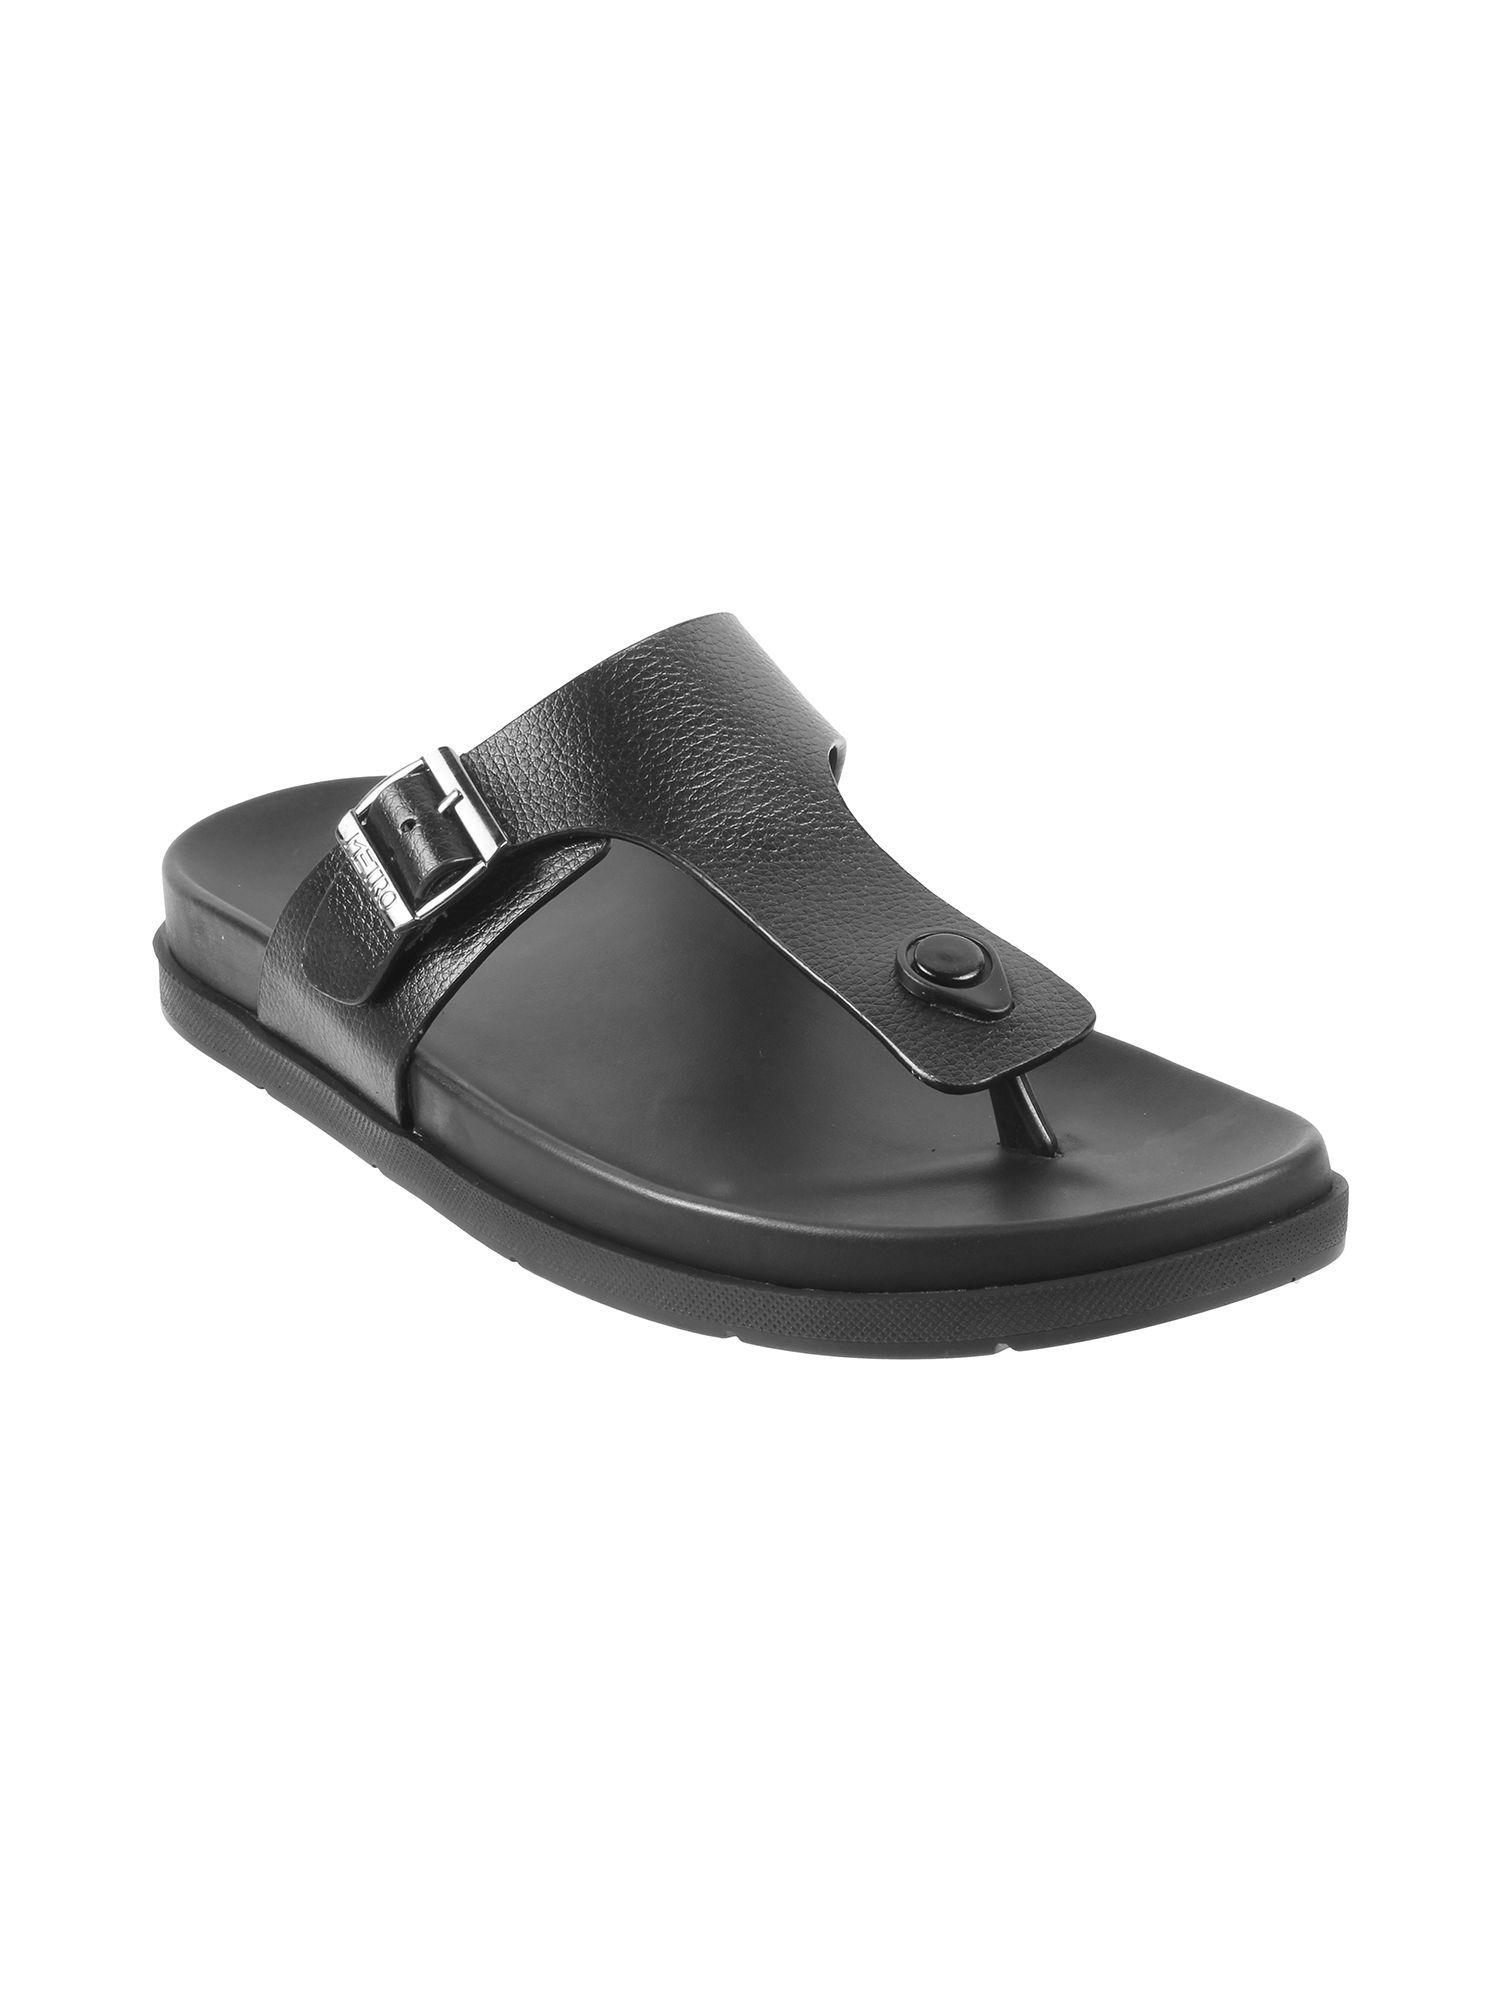 Men Casual Synthetic Black Sandals